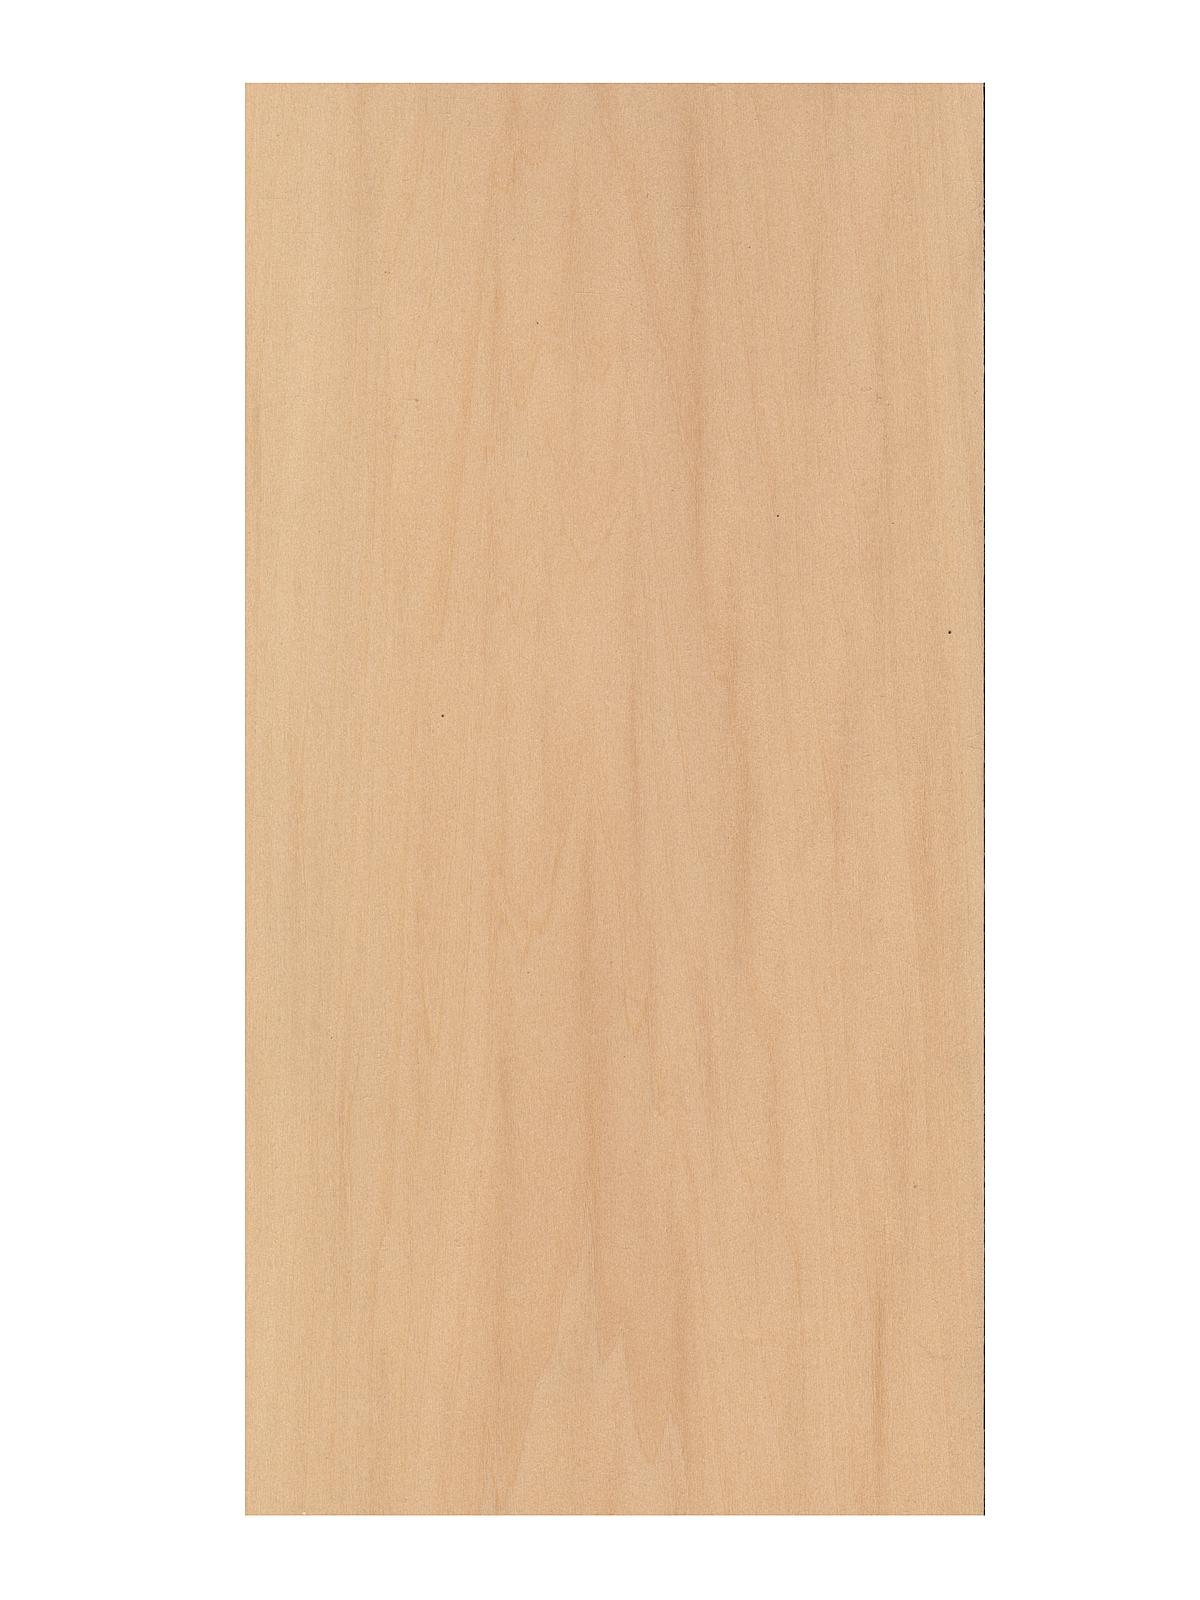 Basswood Sheets 3 16 In. 6 In. X 24 In.